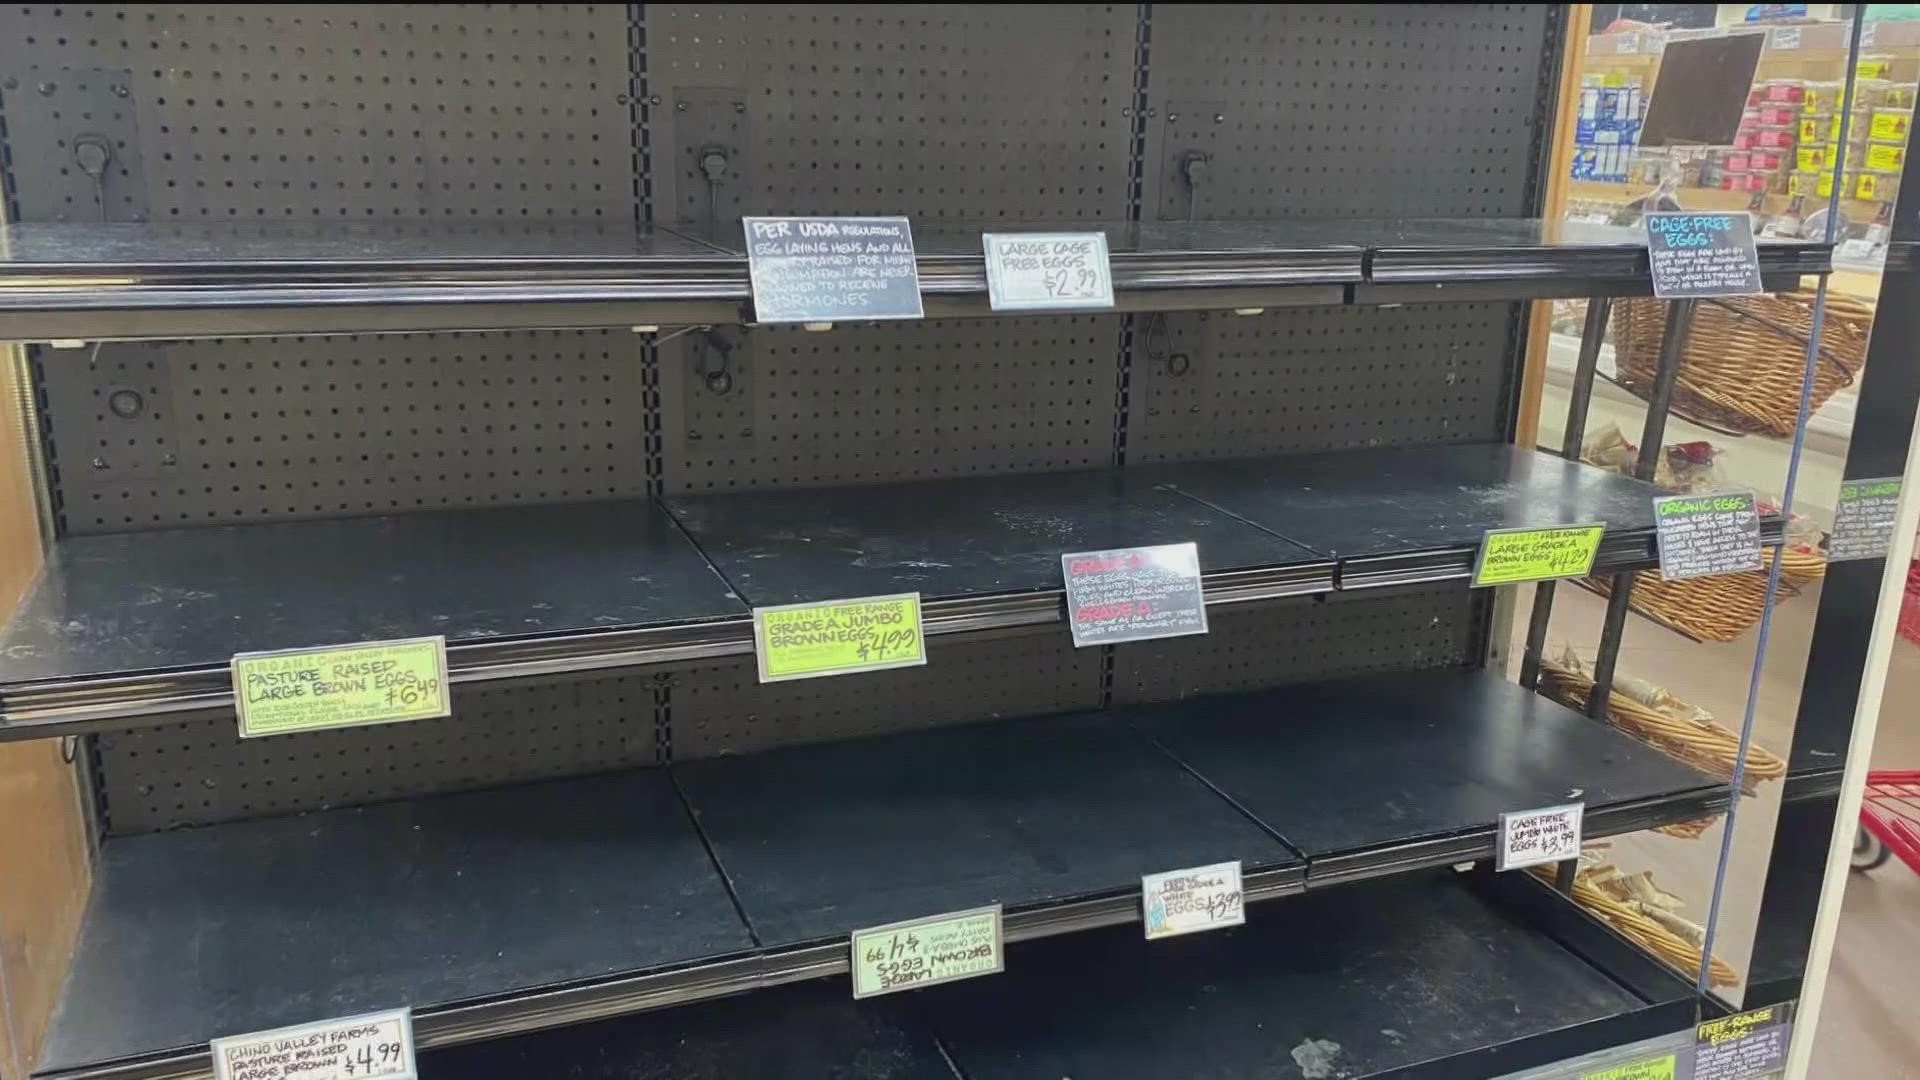 Ongoing shortage leads to local stores running out of eggs or charging significantly more than a year ago.